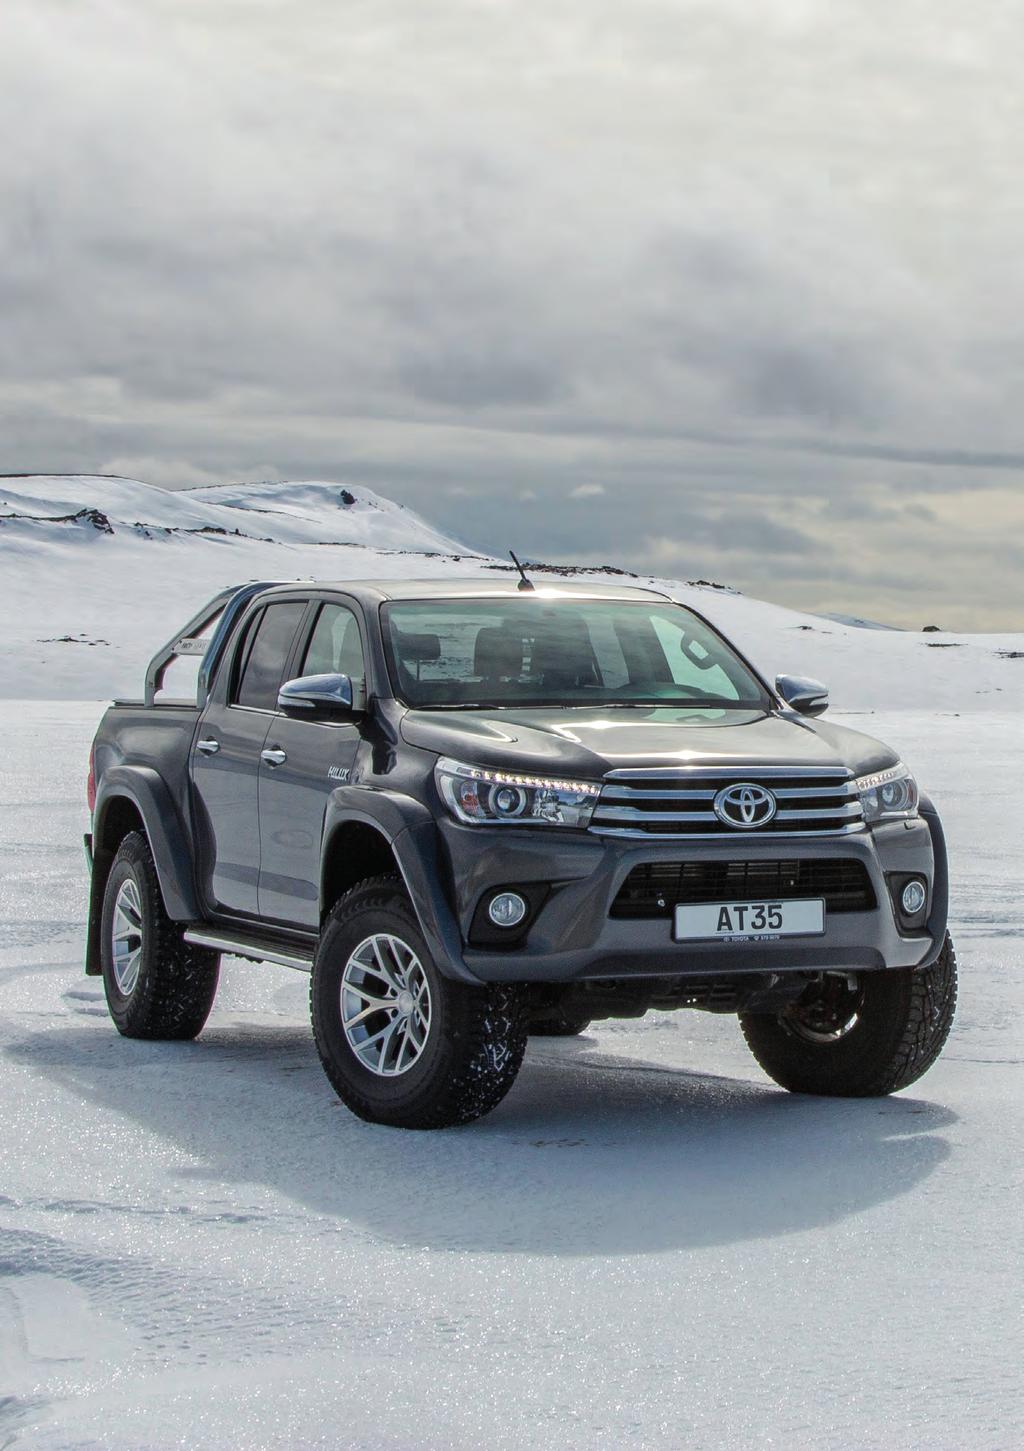 ENGINEERED FROM EXPLORATION MADE FOR ADVENTURE The re-engineered Arctic Trucks Toyota Hilux has driven to both poles and far beyond, with over 300,000km